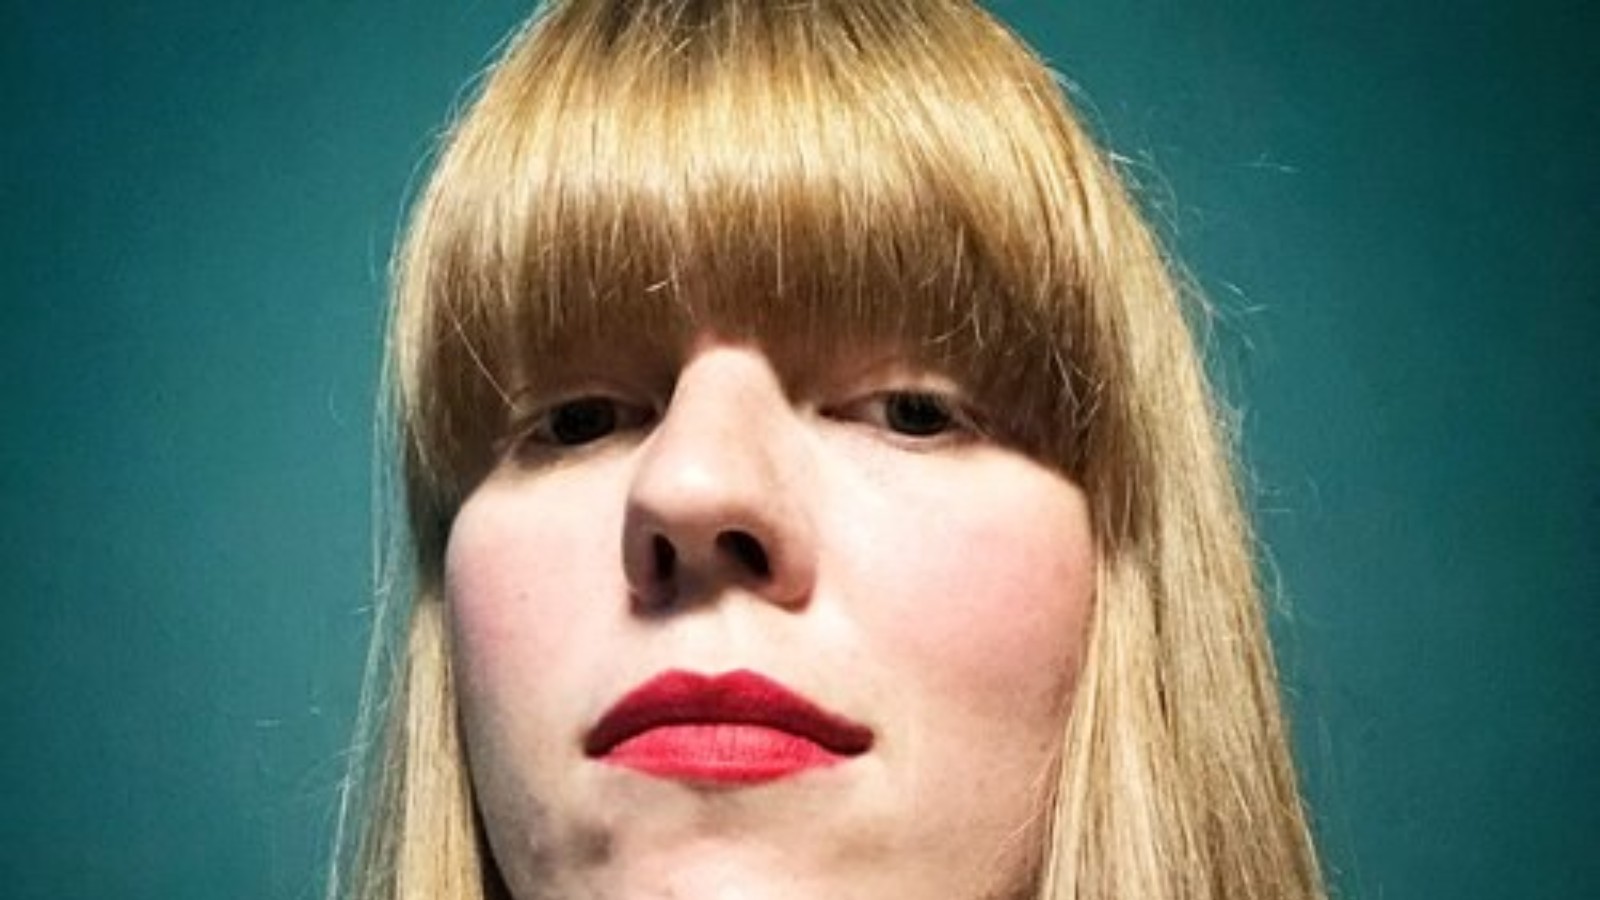 Fox Irving is looking down at the camera, she is stood in front of a dark green Backdrop, and has medium length straight strawberry blonde hair with a fringe. She is wearing red lipstick.